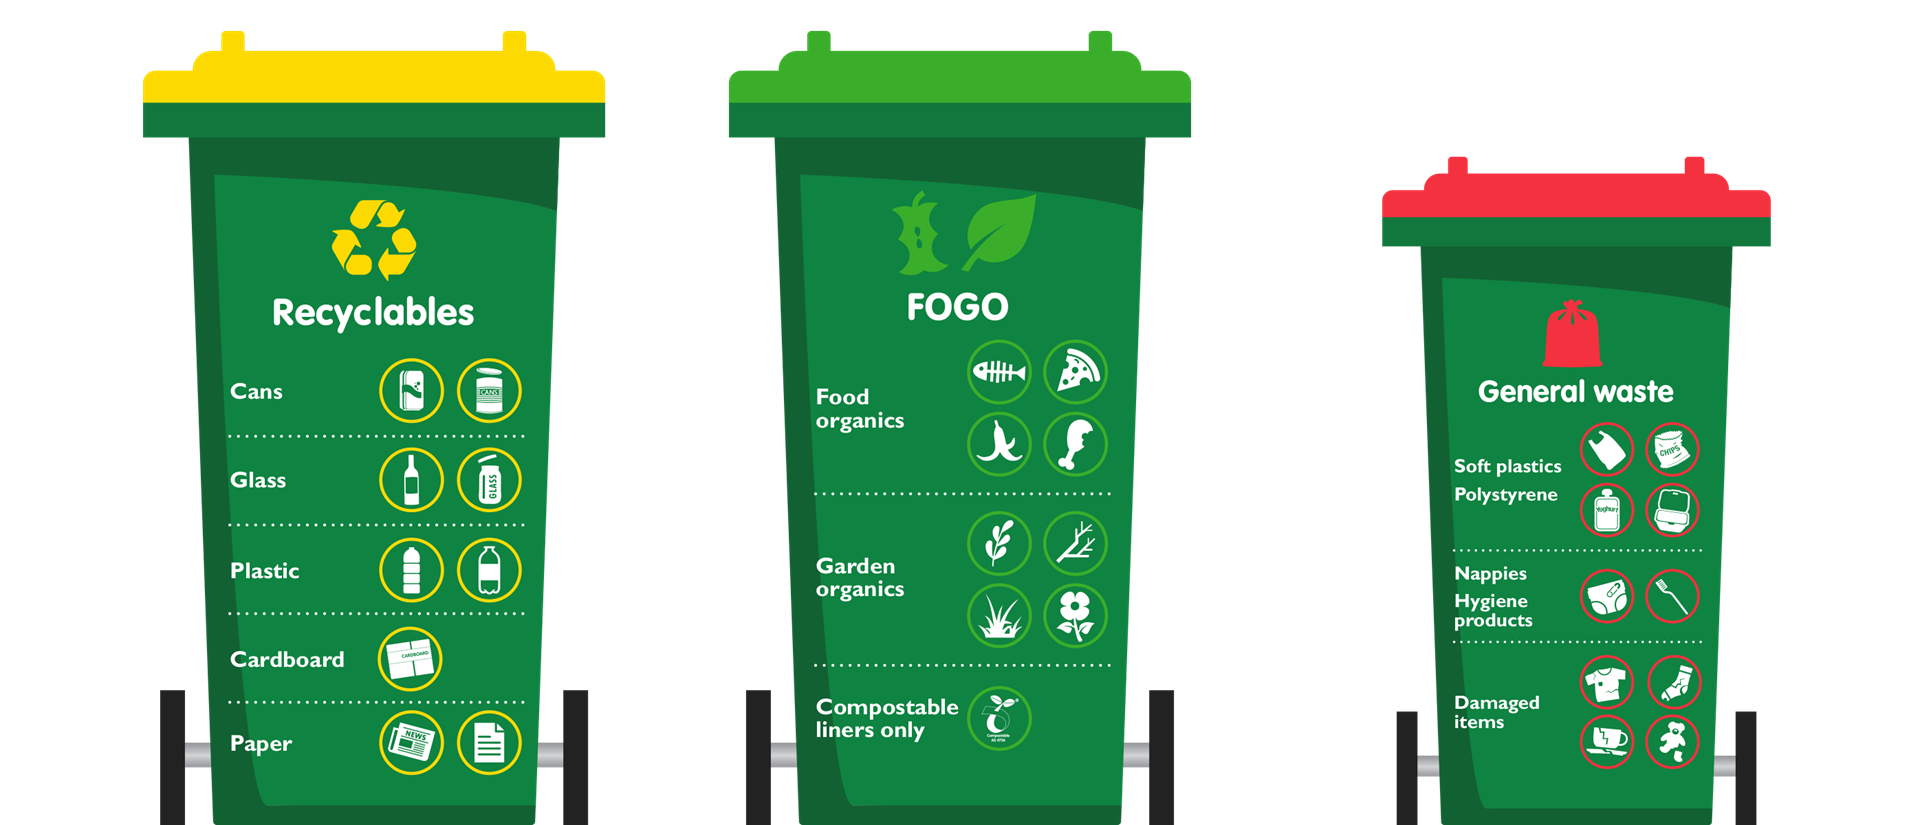 Image of a recycling bin, FOGO bin and general waste bin with their contents